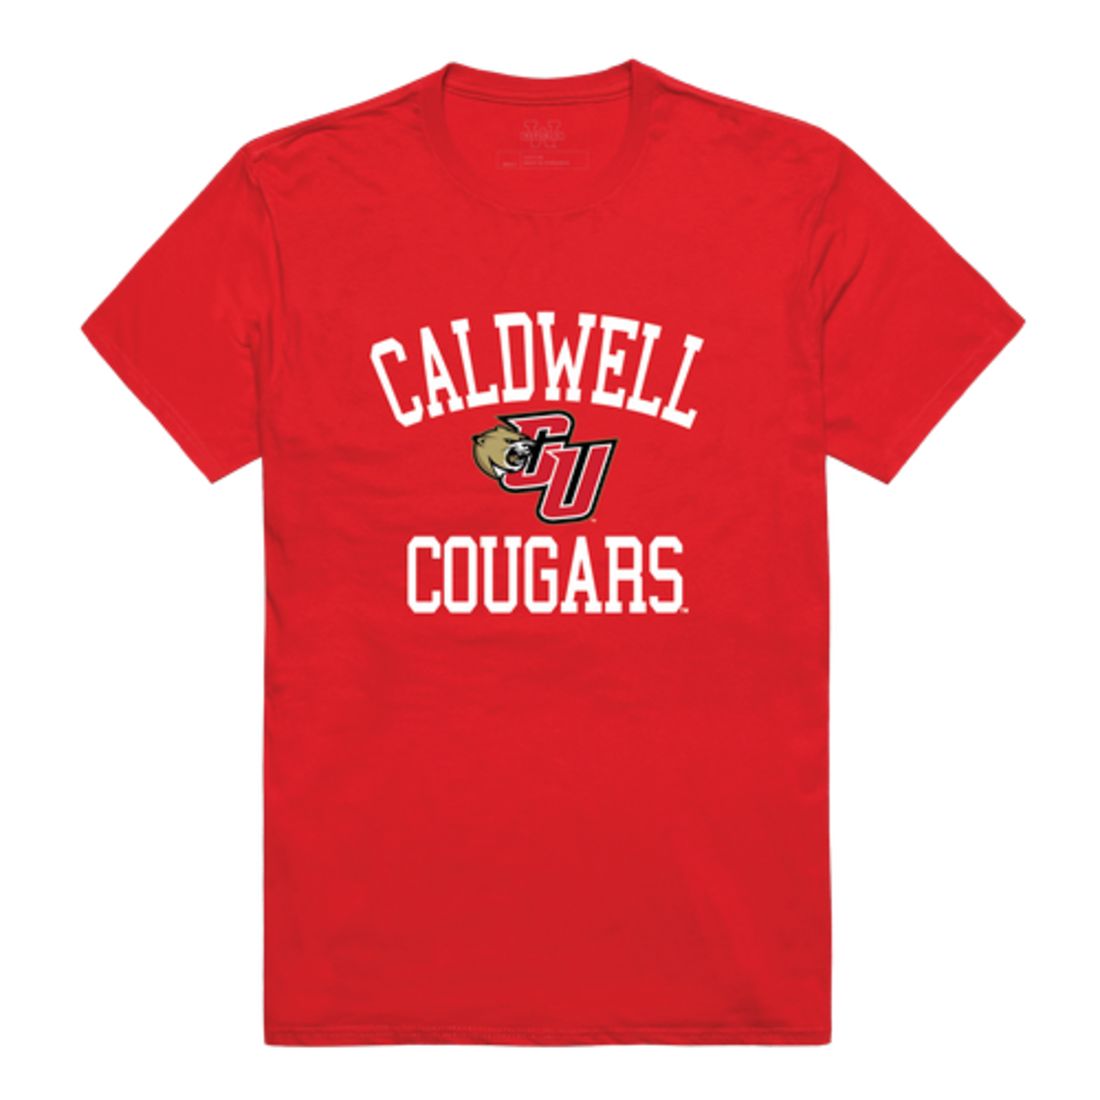 Caldwell University Cougars Arch T-Shirt Tee